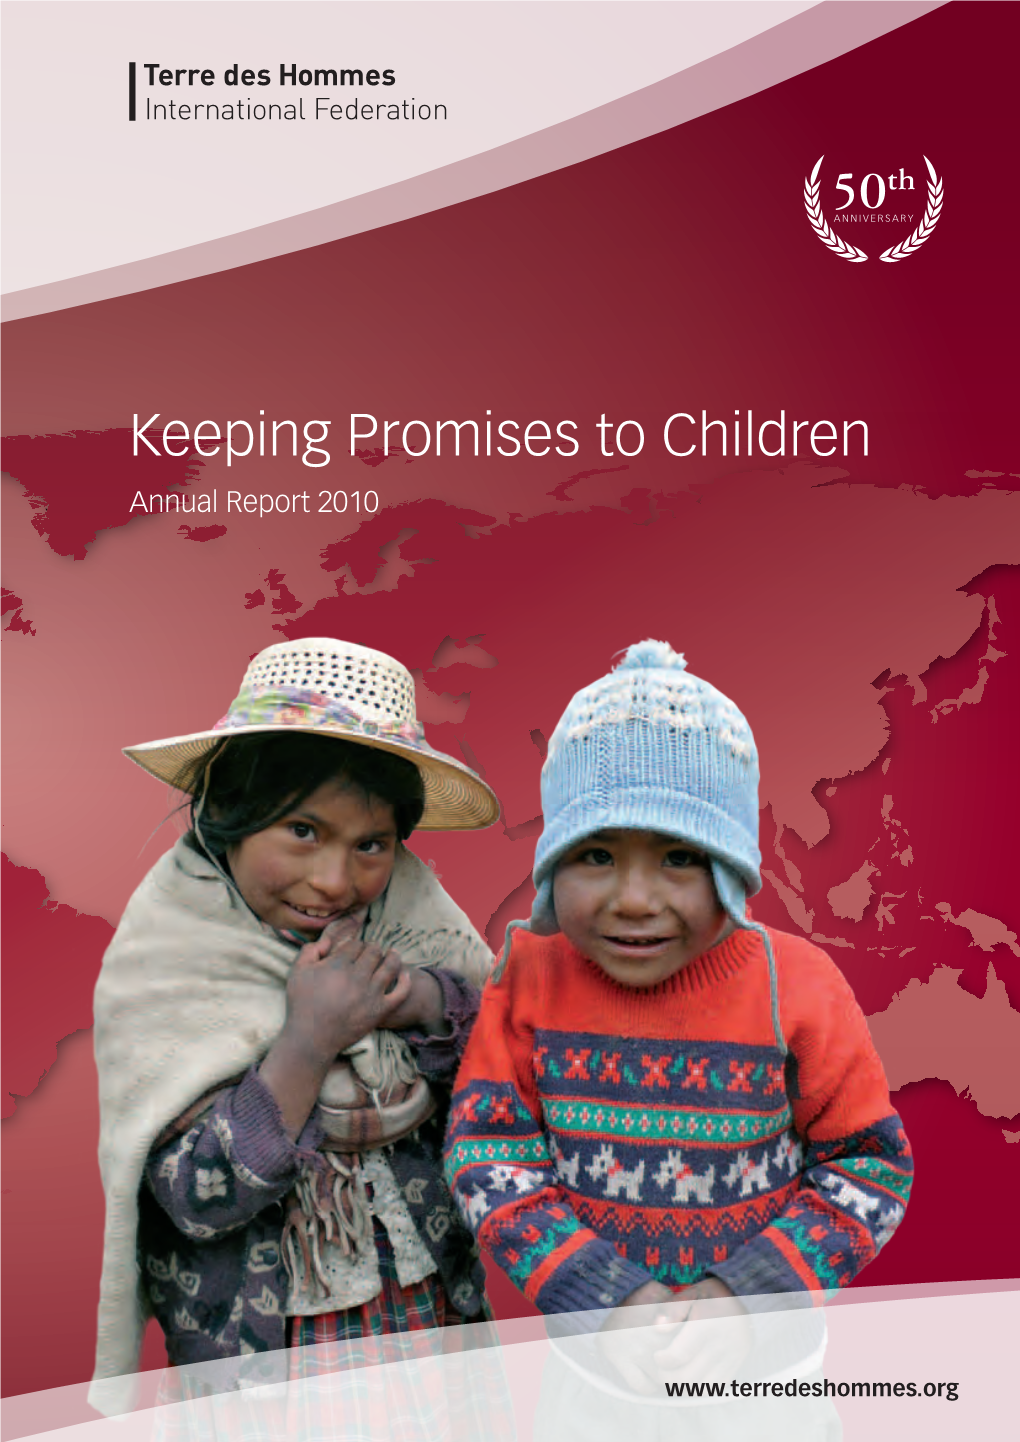 Keeping Promises to Children Annual Report 2010